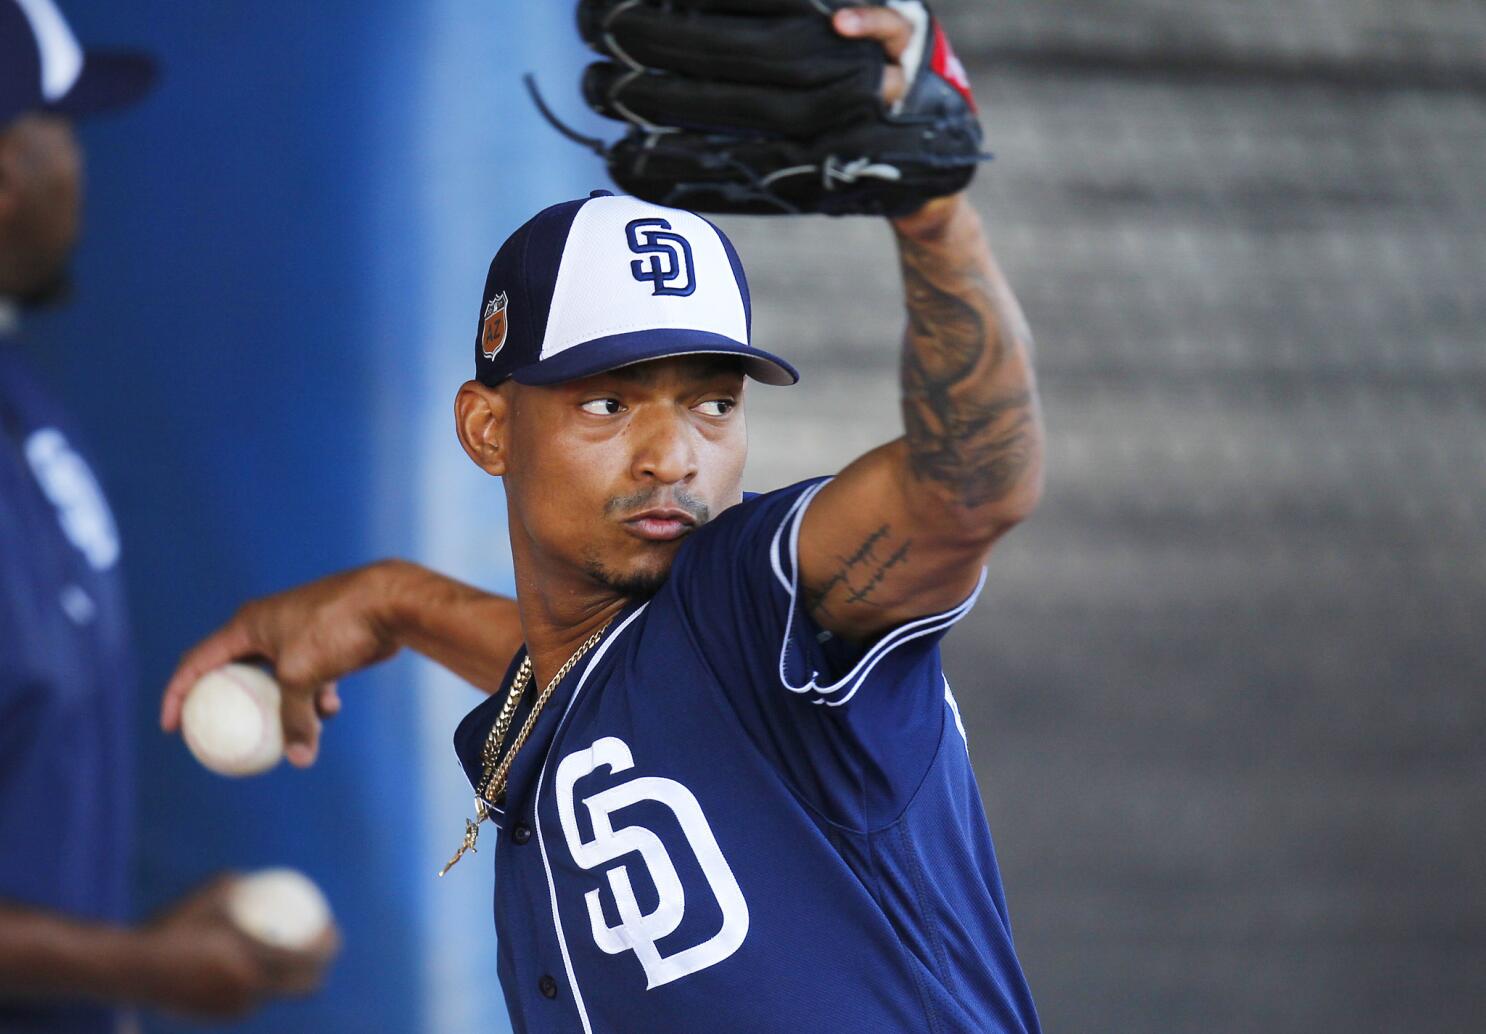 Christian Bethancourt impresses in spring pitching debut - The San